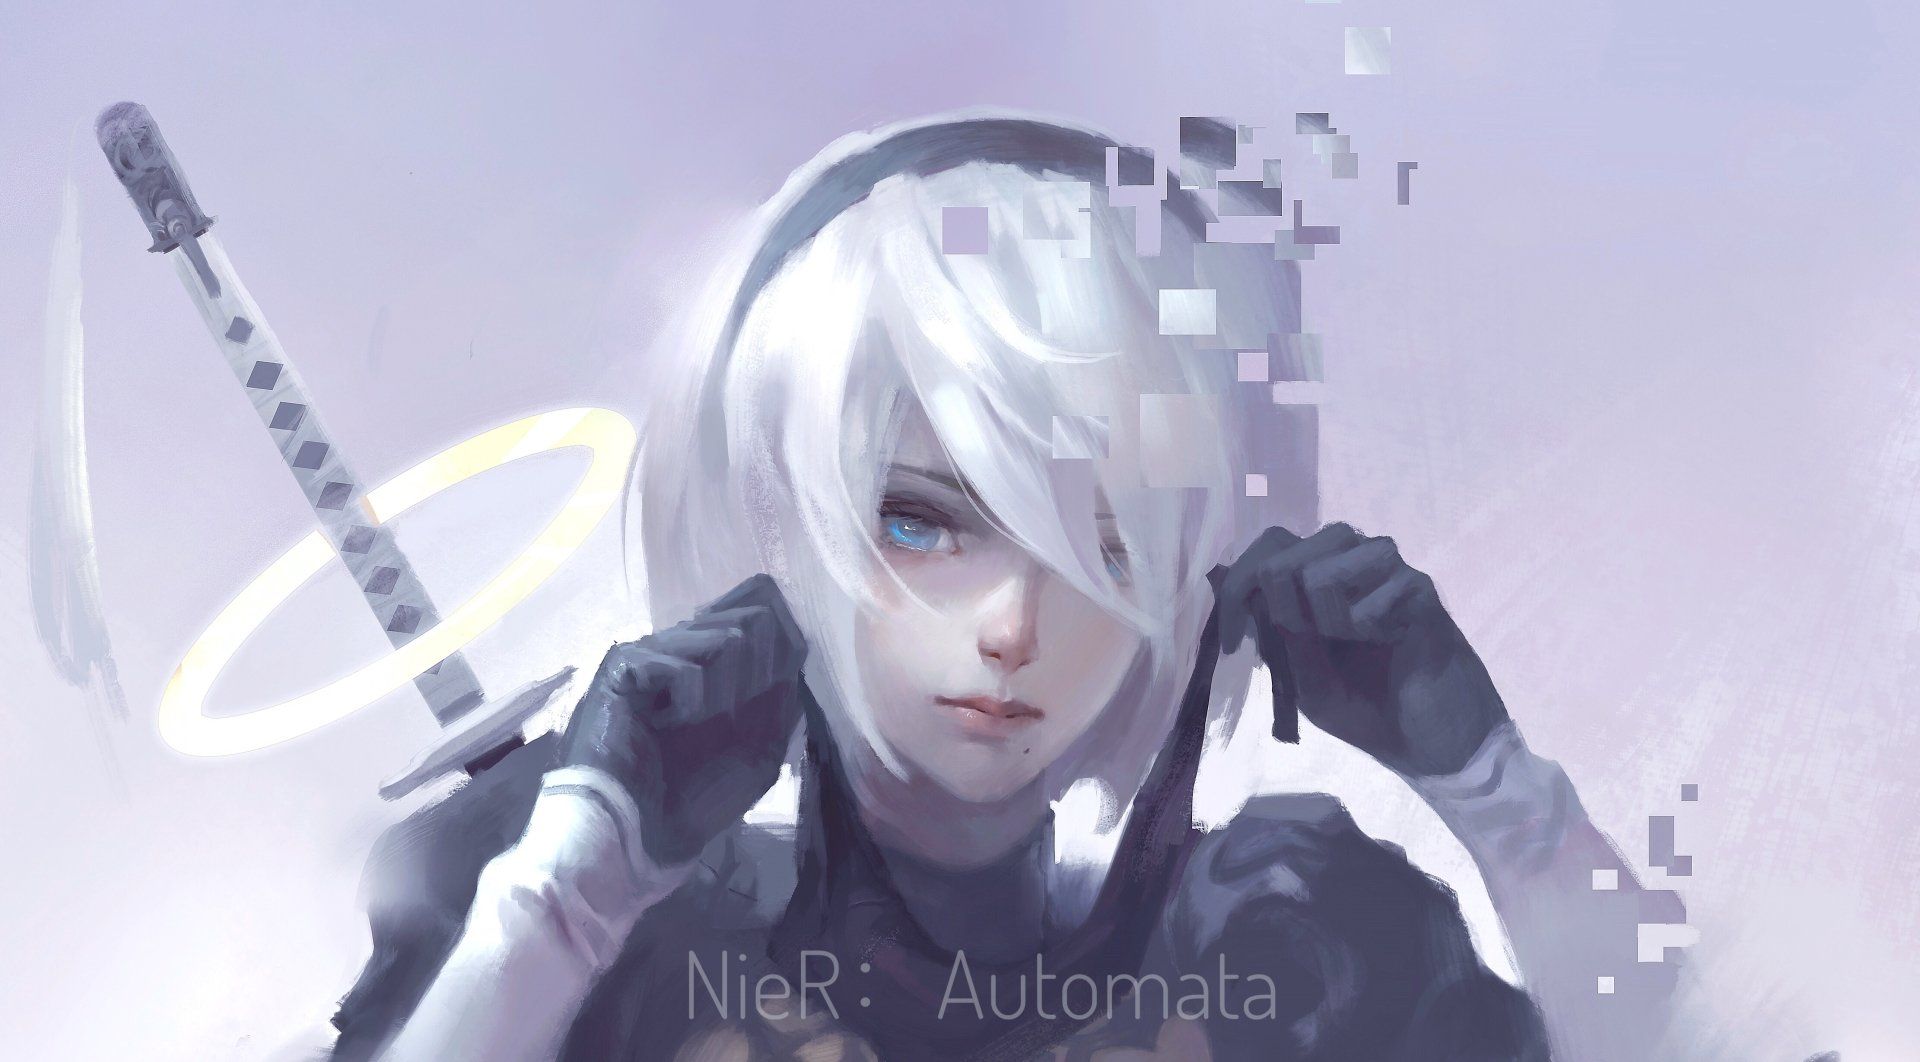 NieR: Automata Wallpaper Background Image. View, download, comment, and rate. Nier automata, Automata, Neir automata